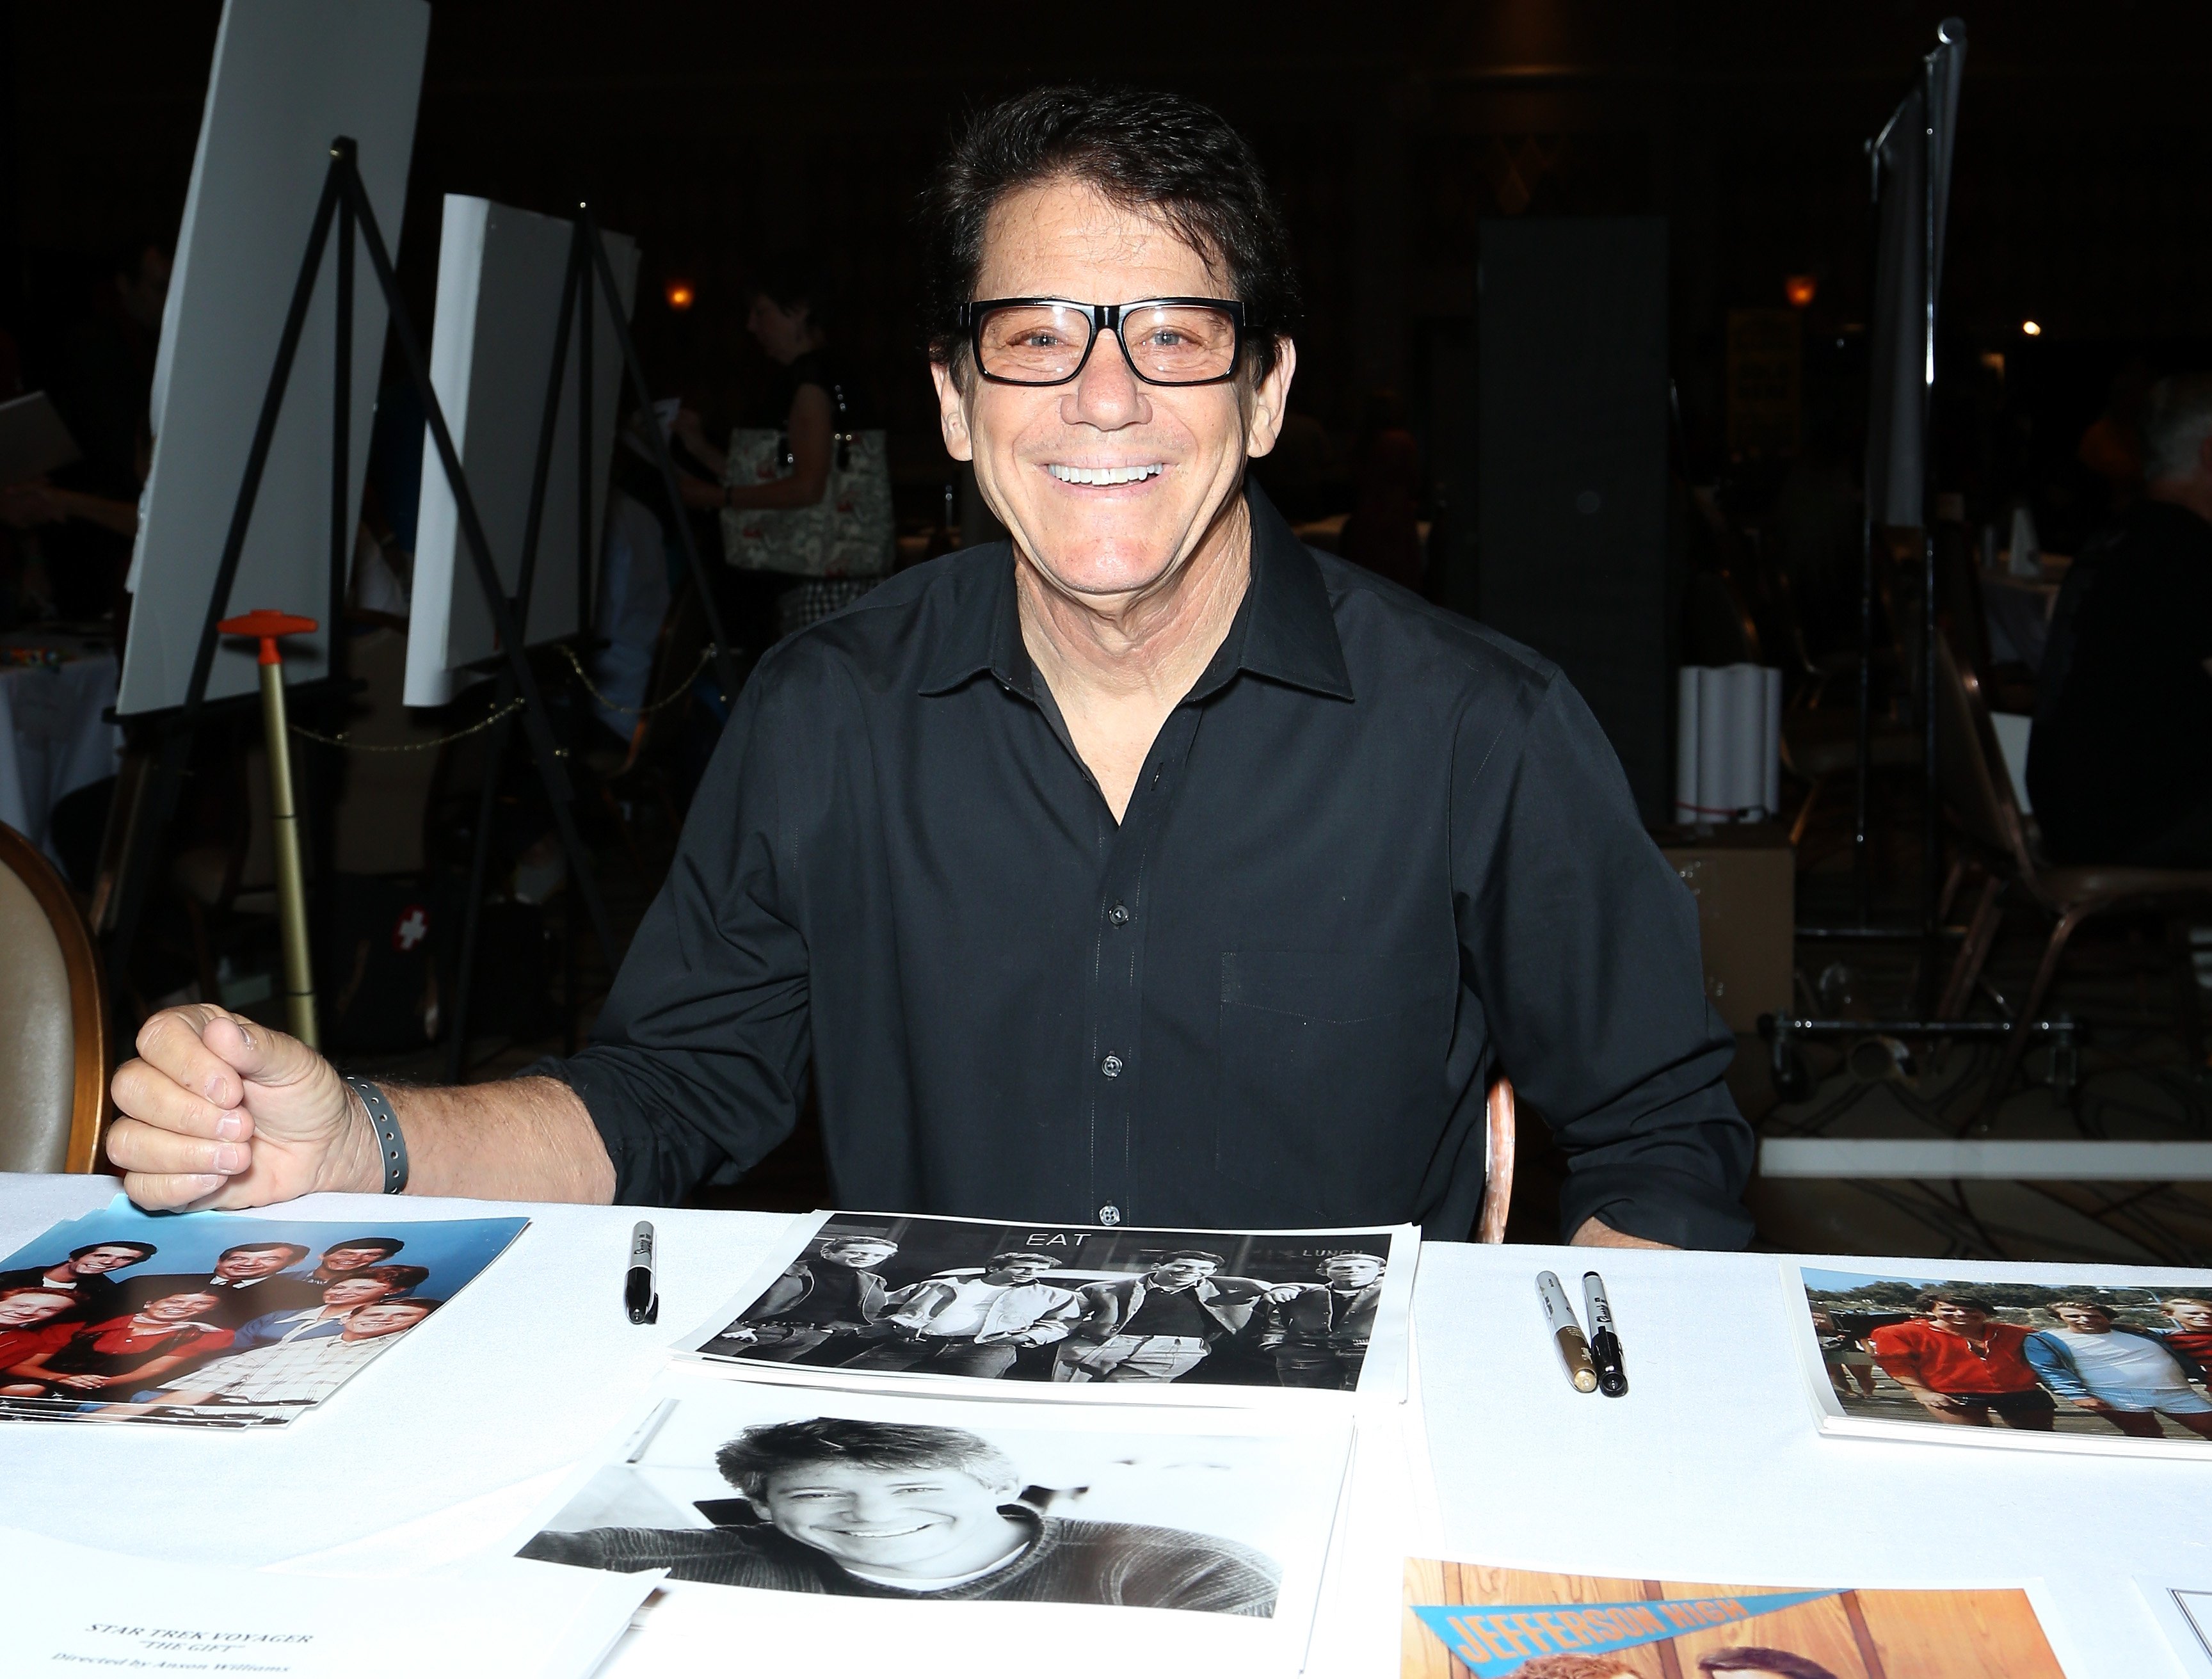 Anson Williams attends the 14th annual official Star Trek convention on August 6, 2015 | Photo: Getty Images